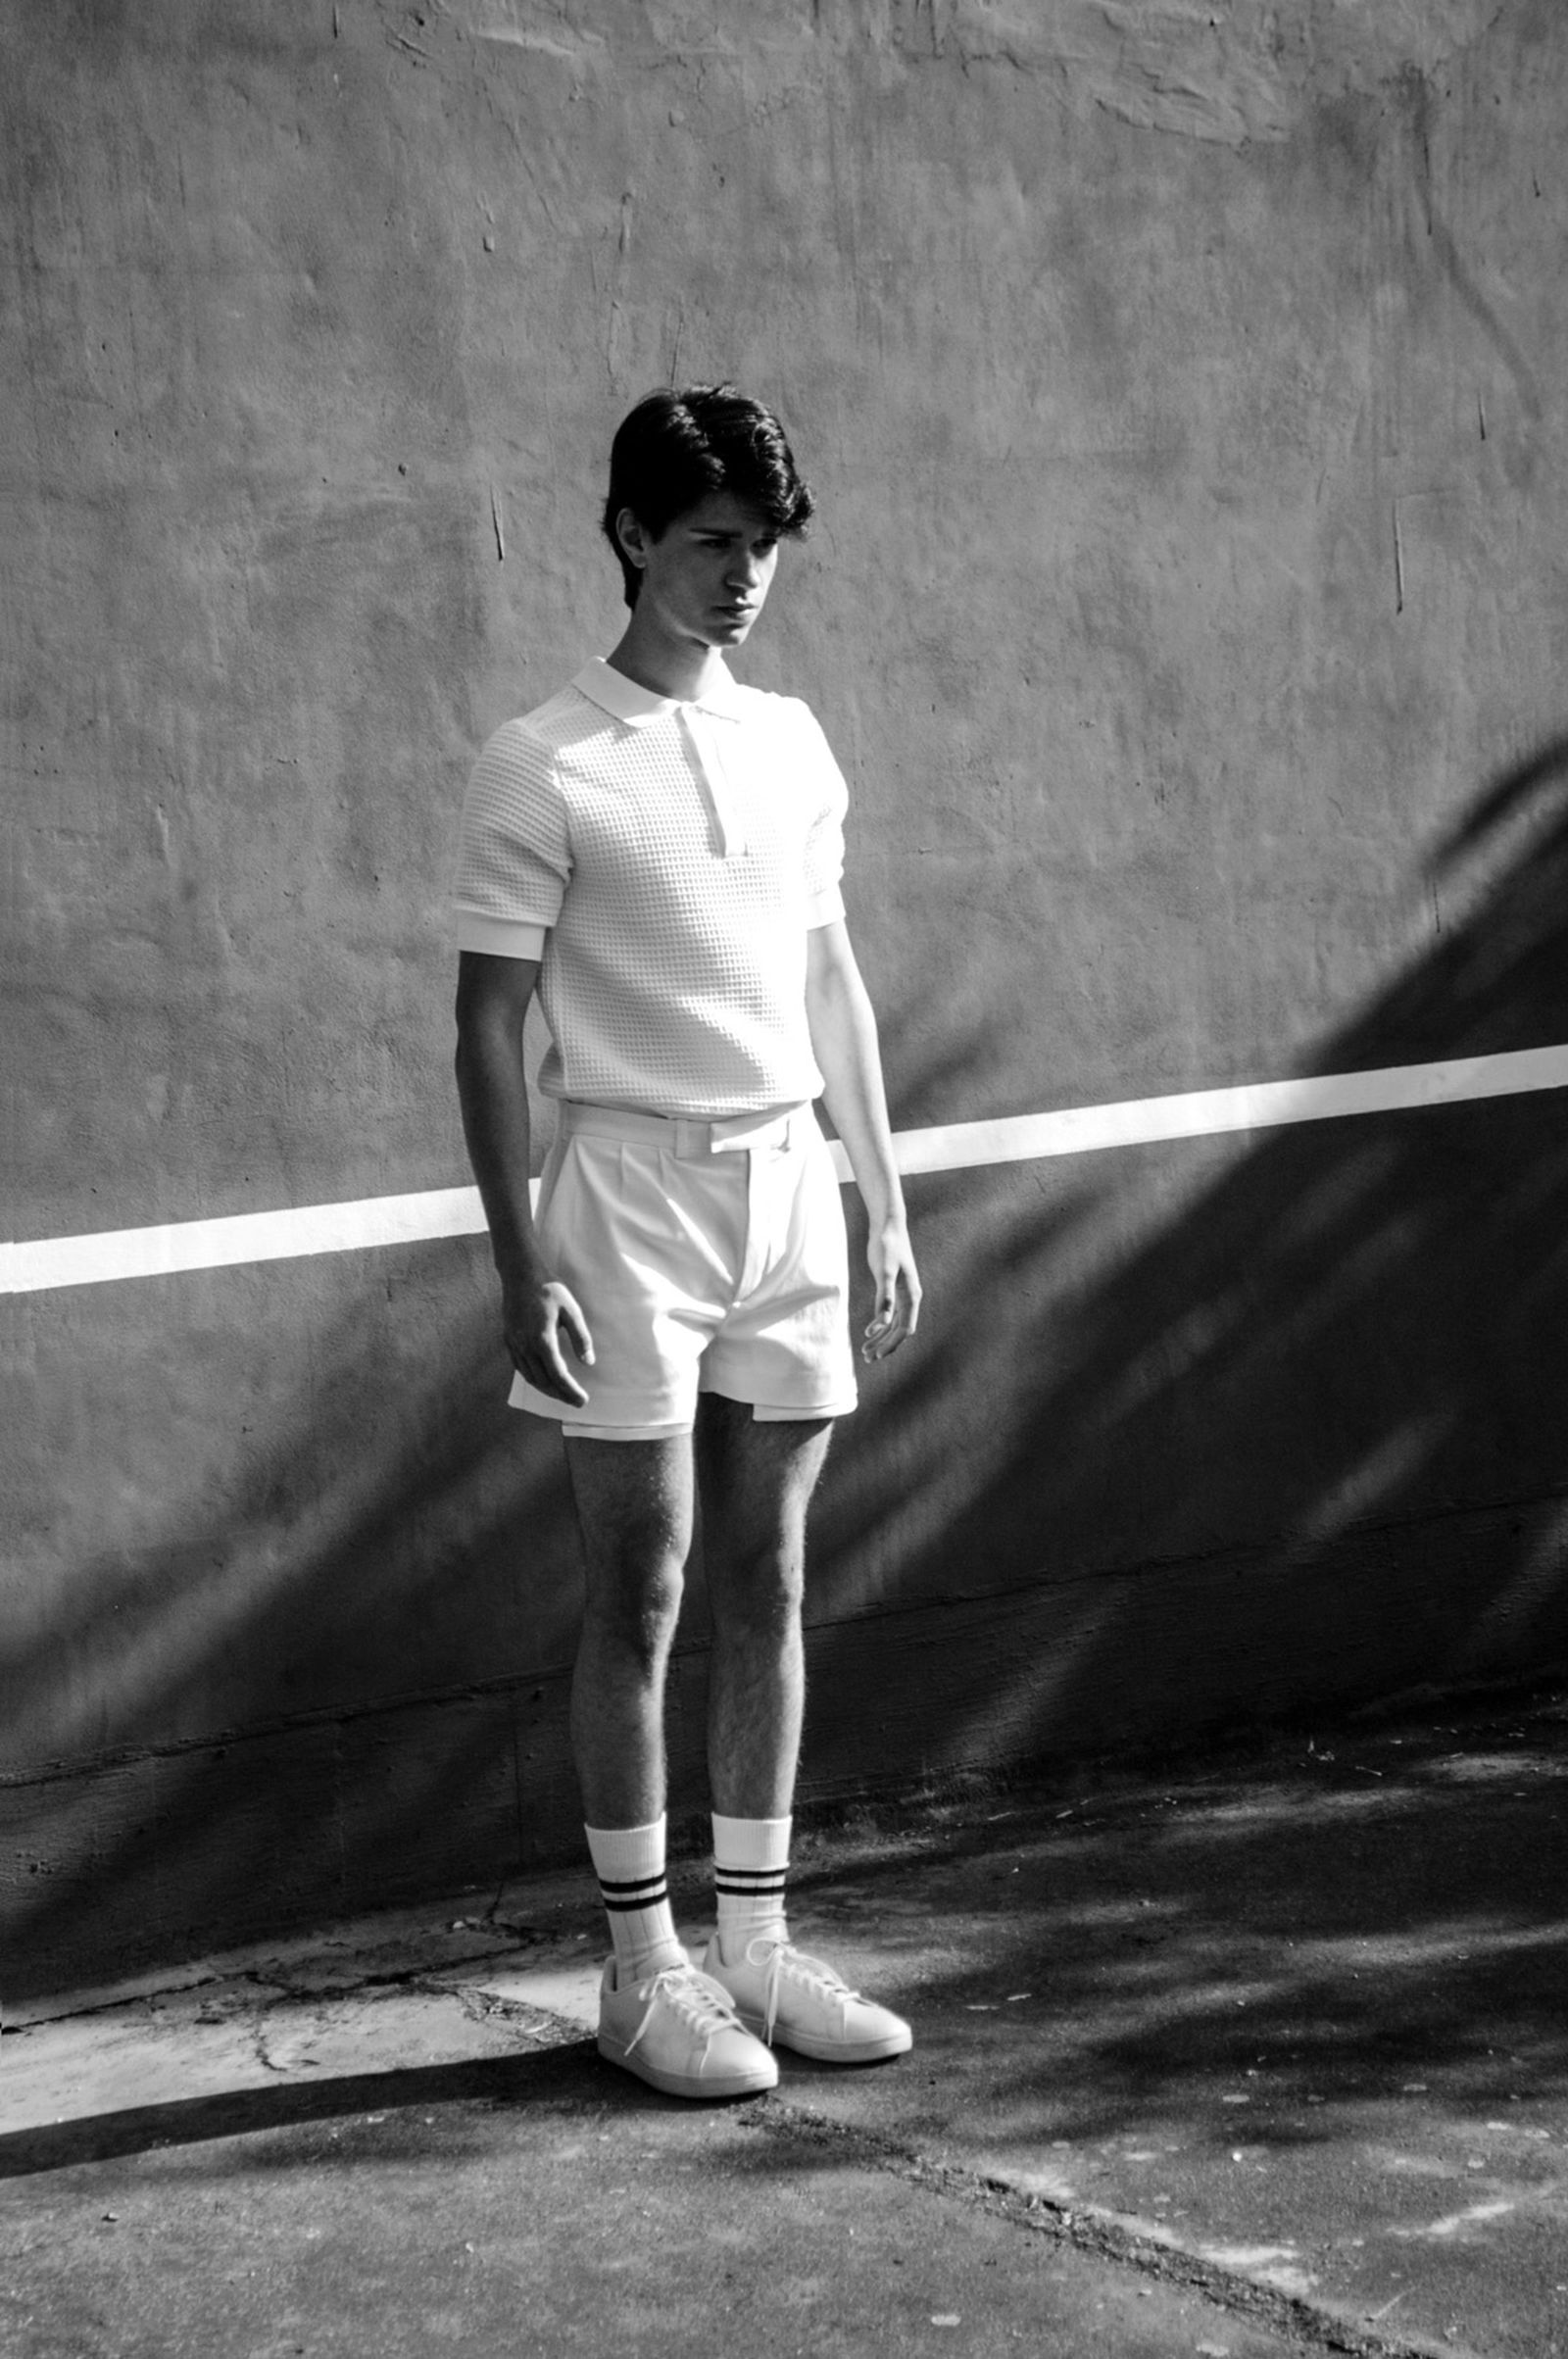 the-campaign-to-make-tennis-chic-again-starts-here-04